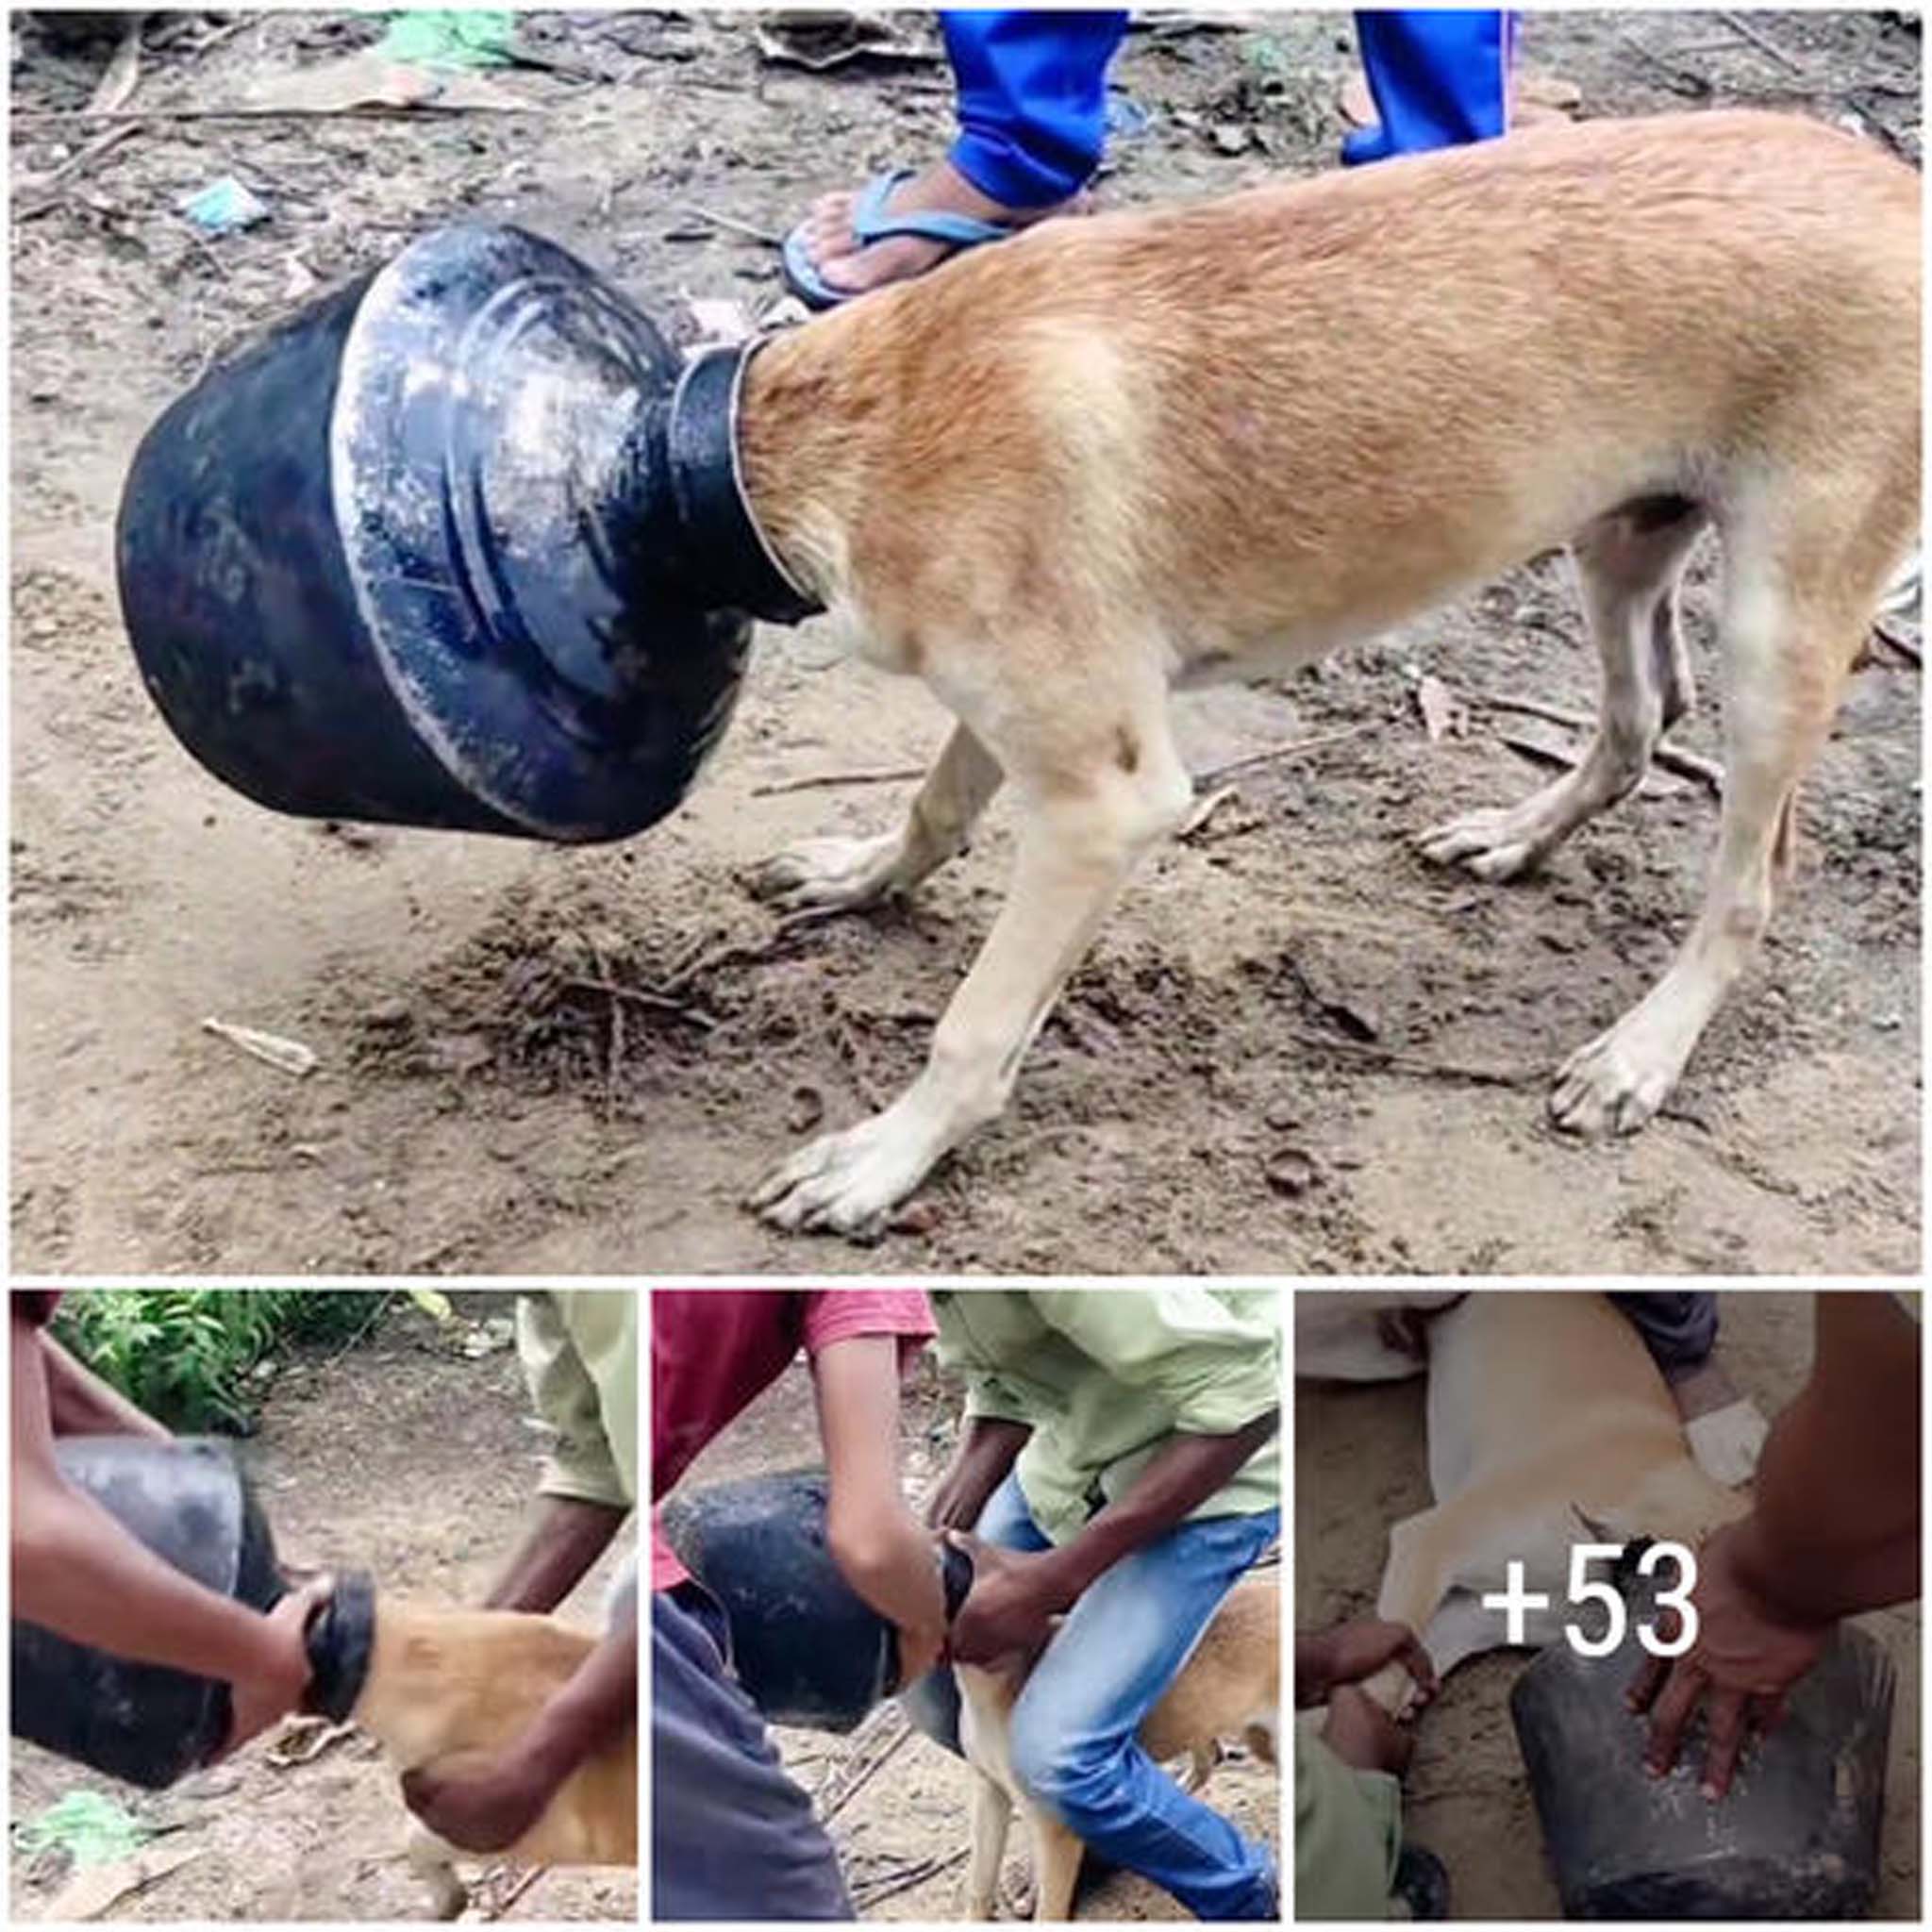 Unable to scream, the fate of a stray dog whose head was stuck in a metal jar caused him extreme pain and helplessness